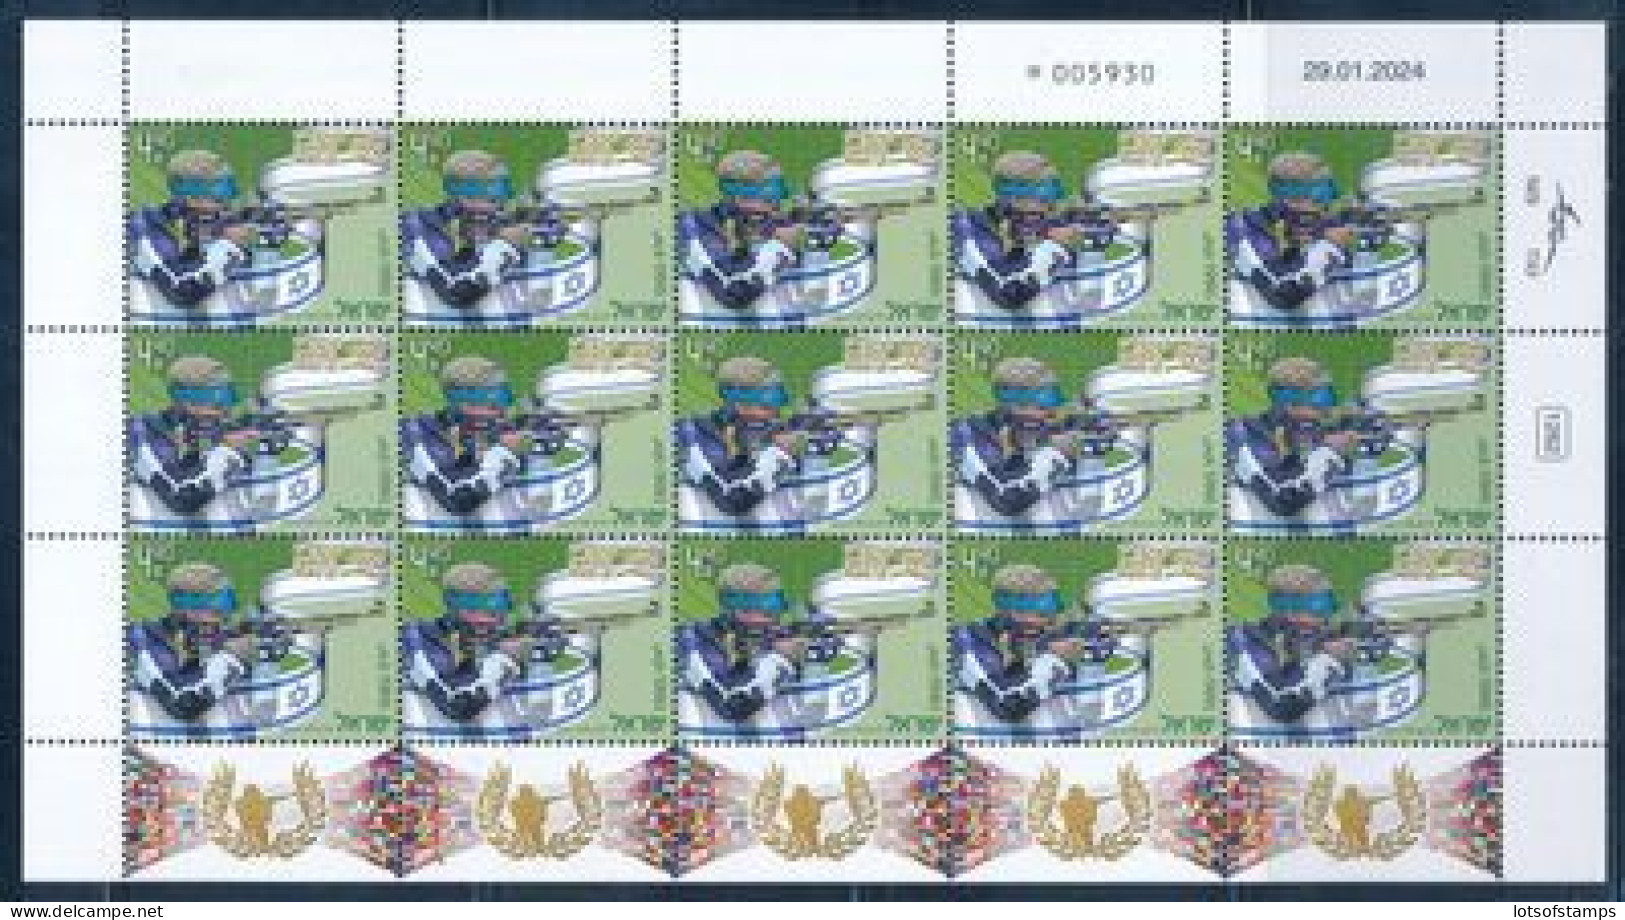 ISRAEL 2024 THE OLYMPIC GAMES IN PARIS STAMPS SET OF 3 SHEETS MNH - SEE 3 SCANS - Nuovi